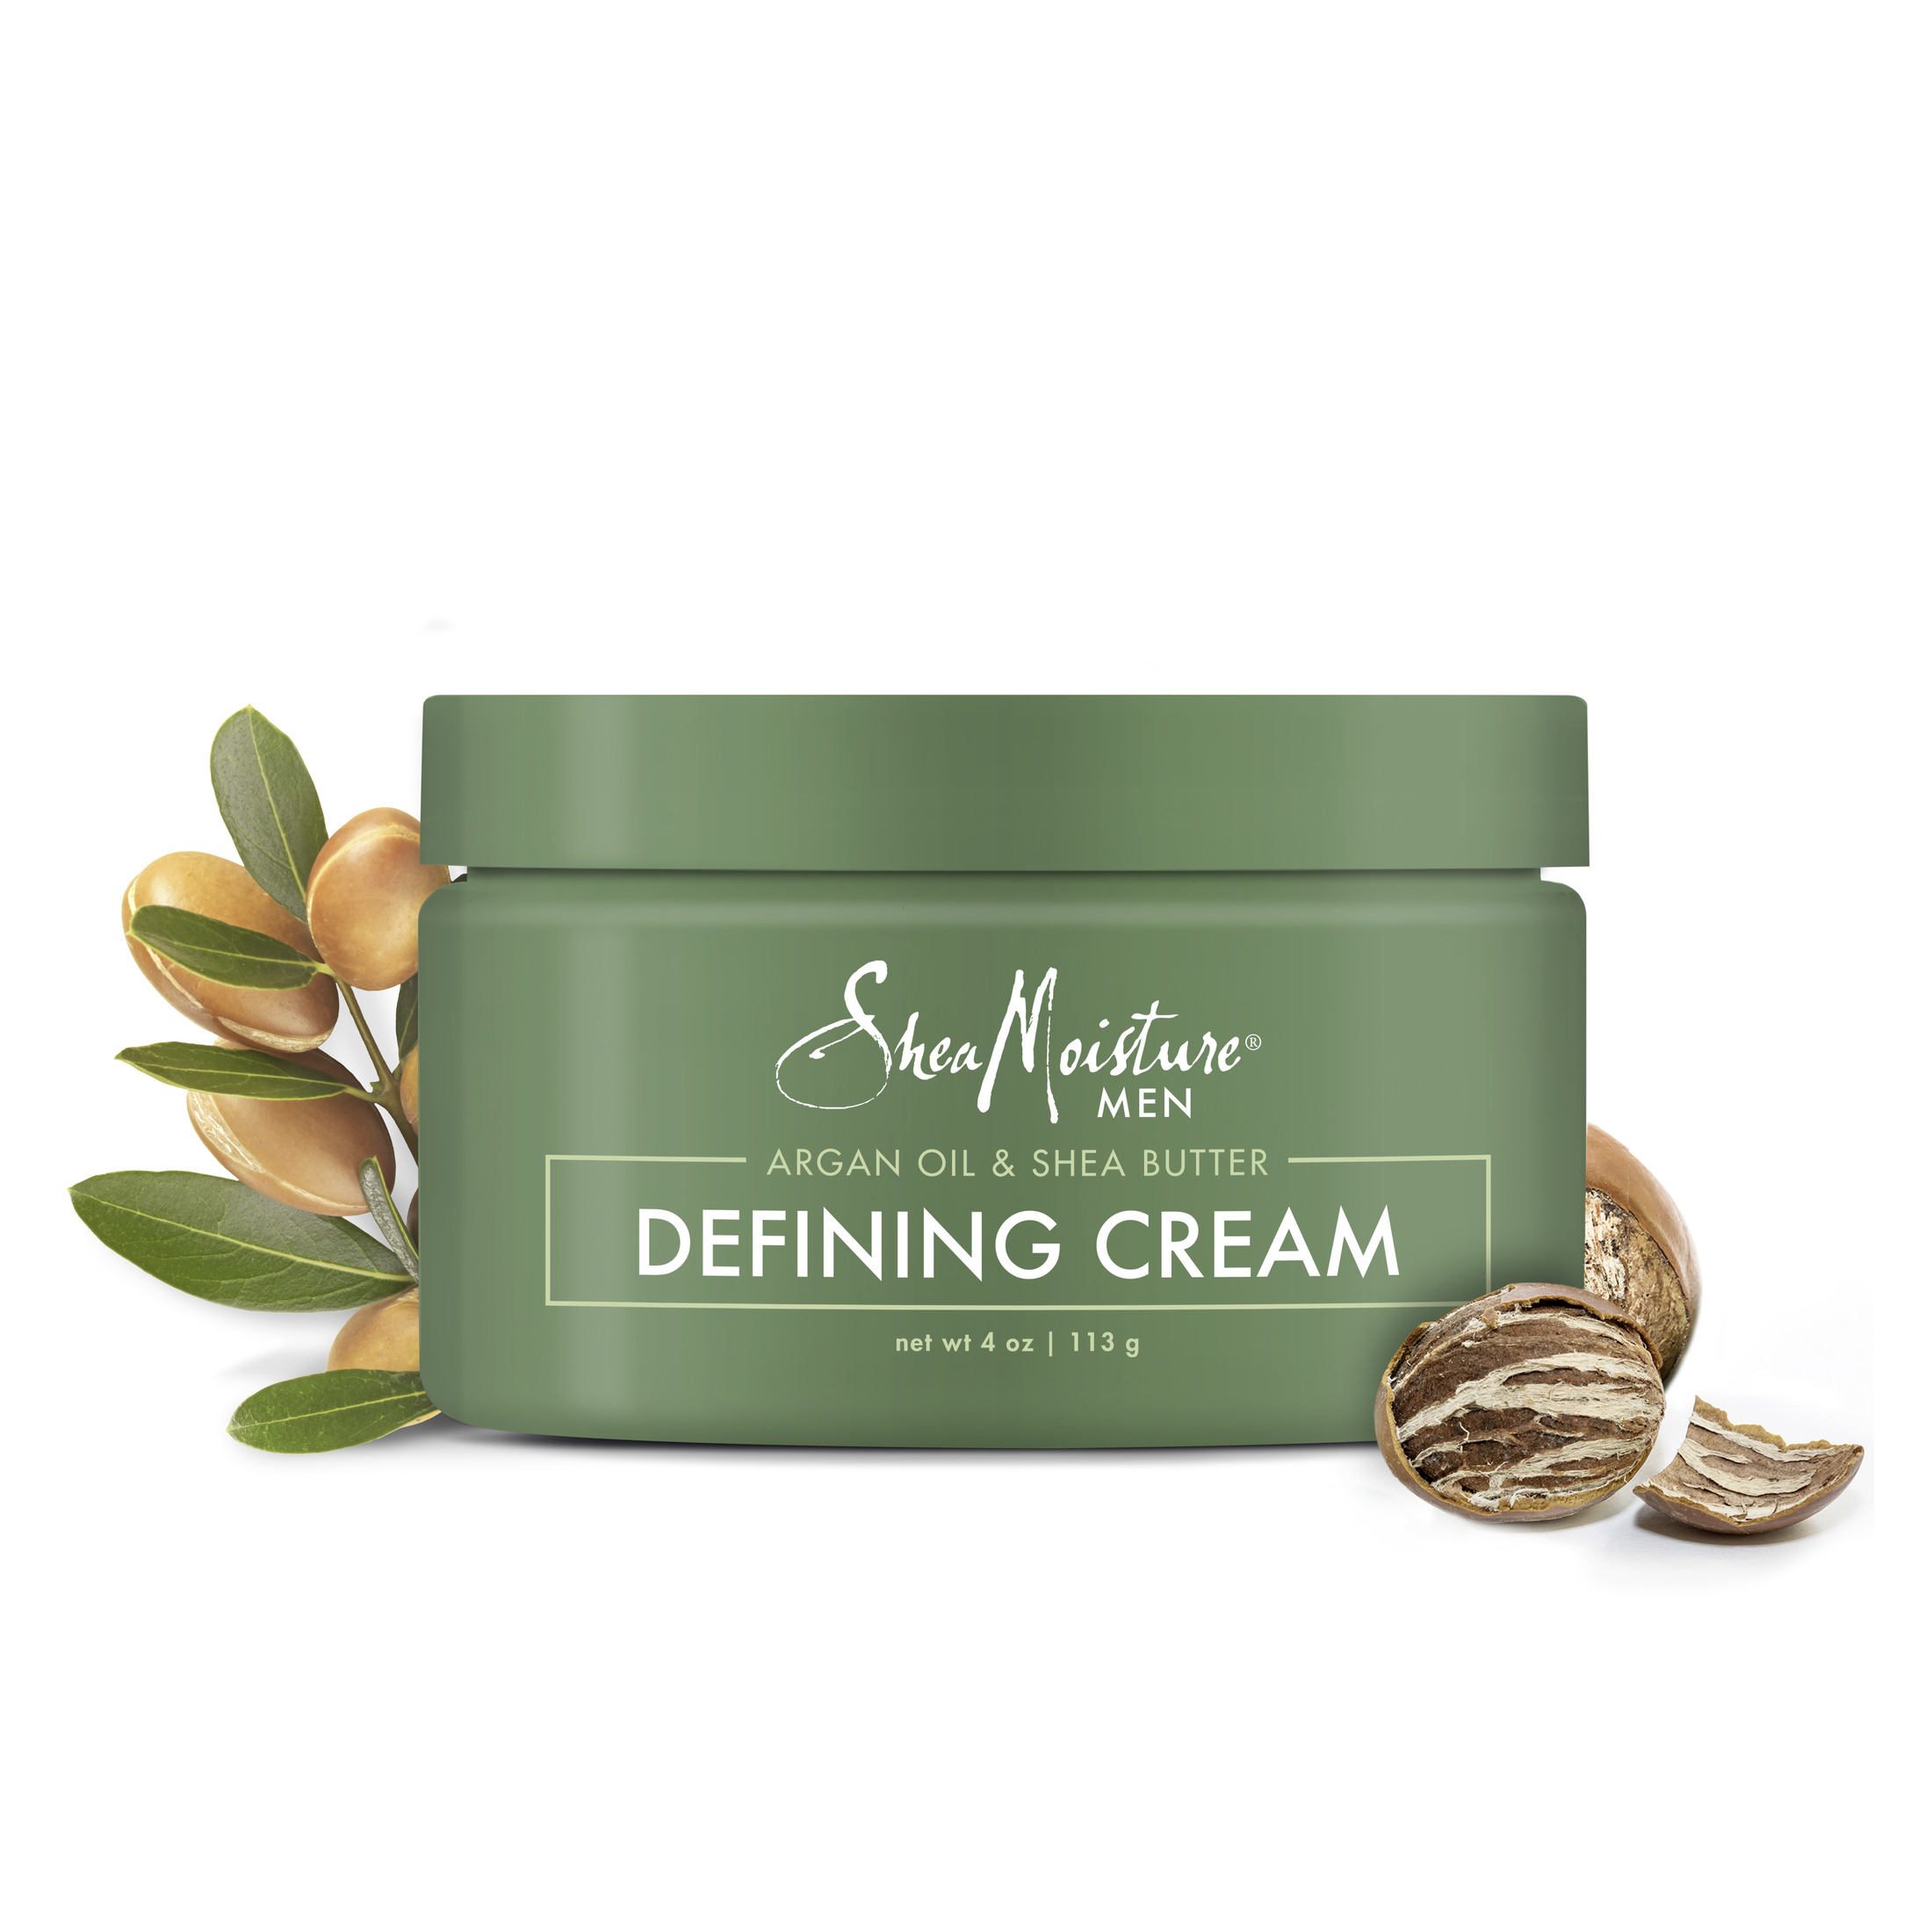 SheaMoisture Men's Defining Hair Cream Argan Oil and Shea for Curly Hair with Shea Butter 4 oz - image 3 of 9